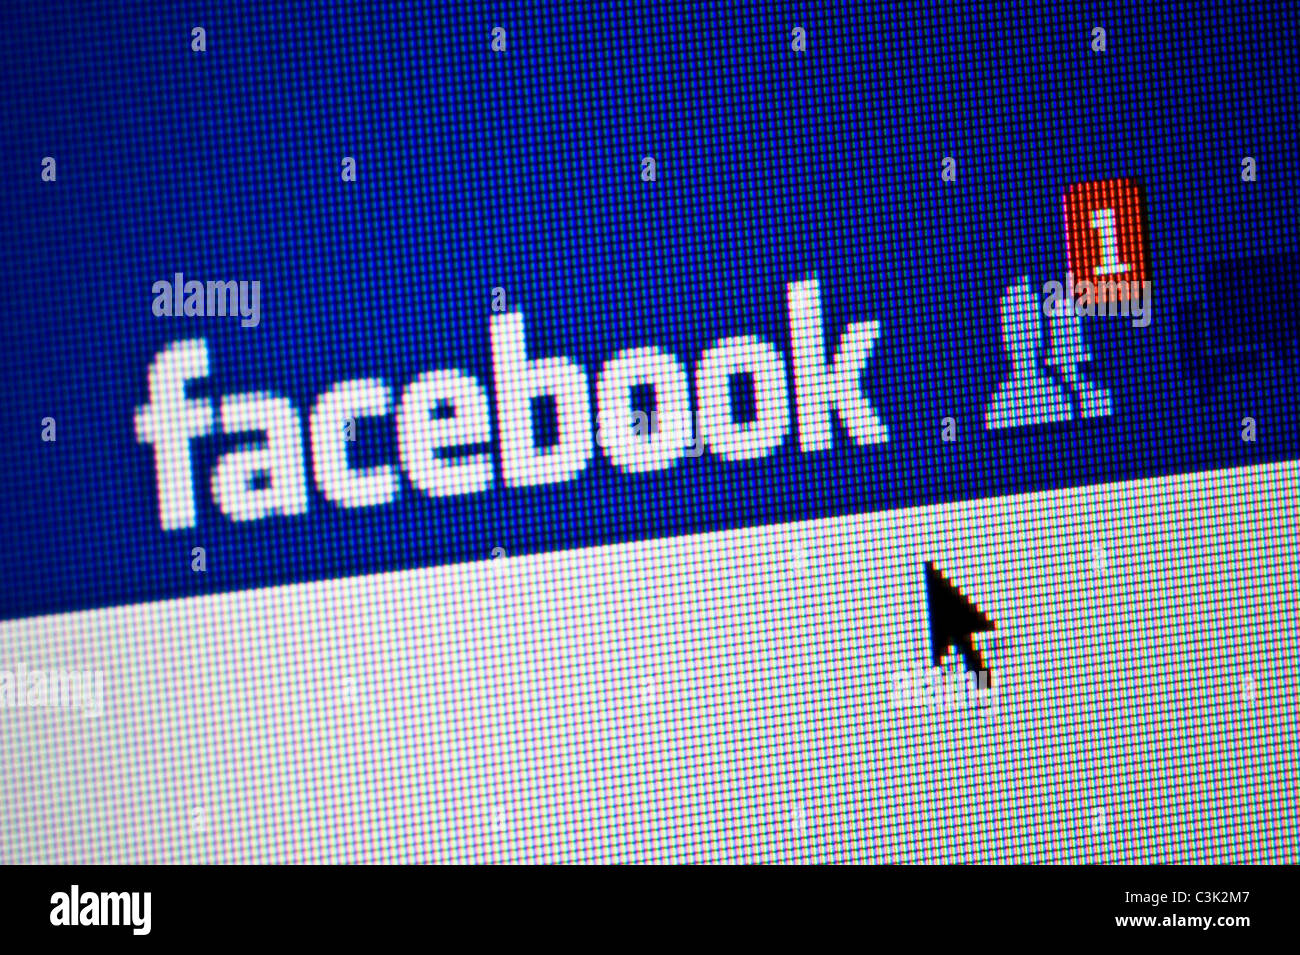 Close up of Facebook friend request on social networking website. (Editorial use only: print, TV, e-book and editorial website) Stock Photo